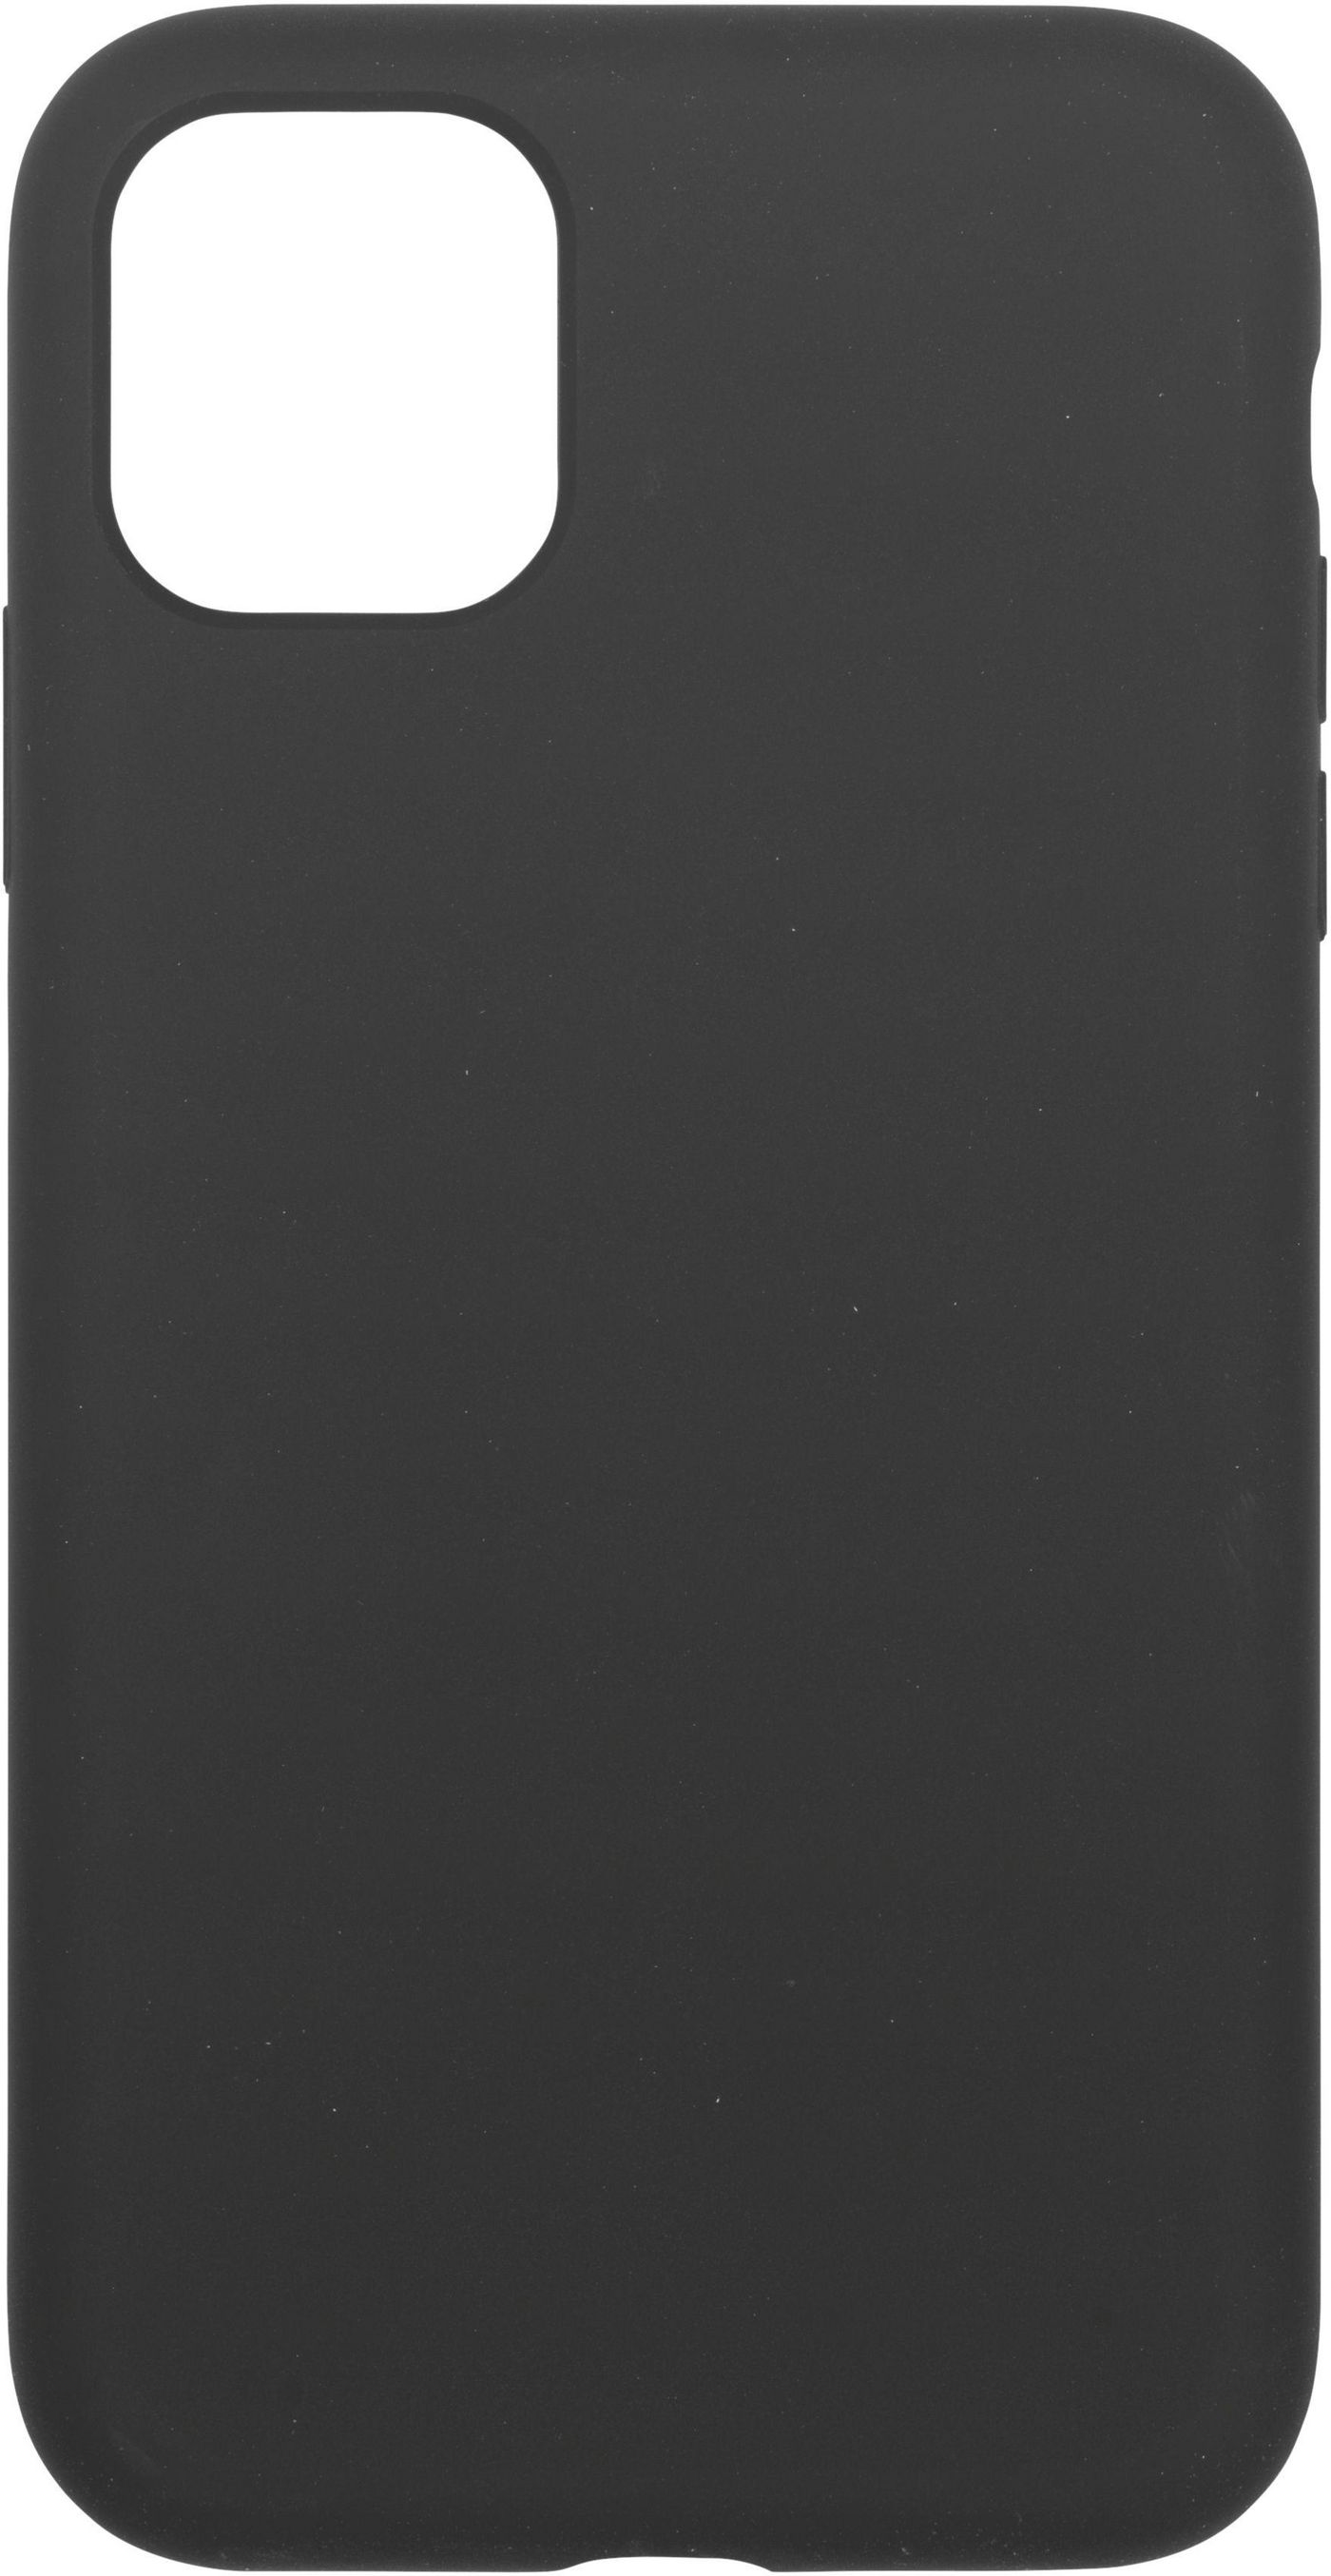 iPhone 11pro Silicone Case Black Silk Touch